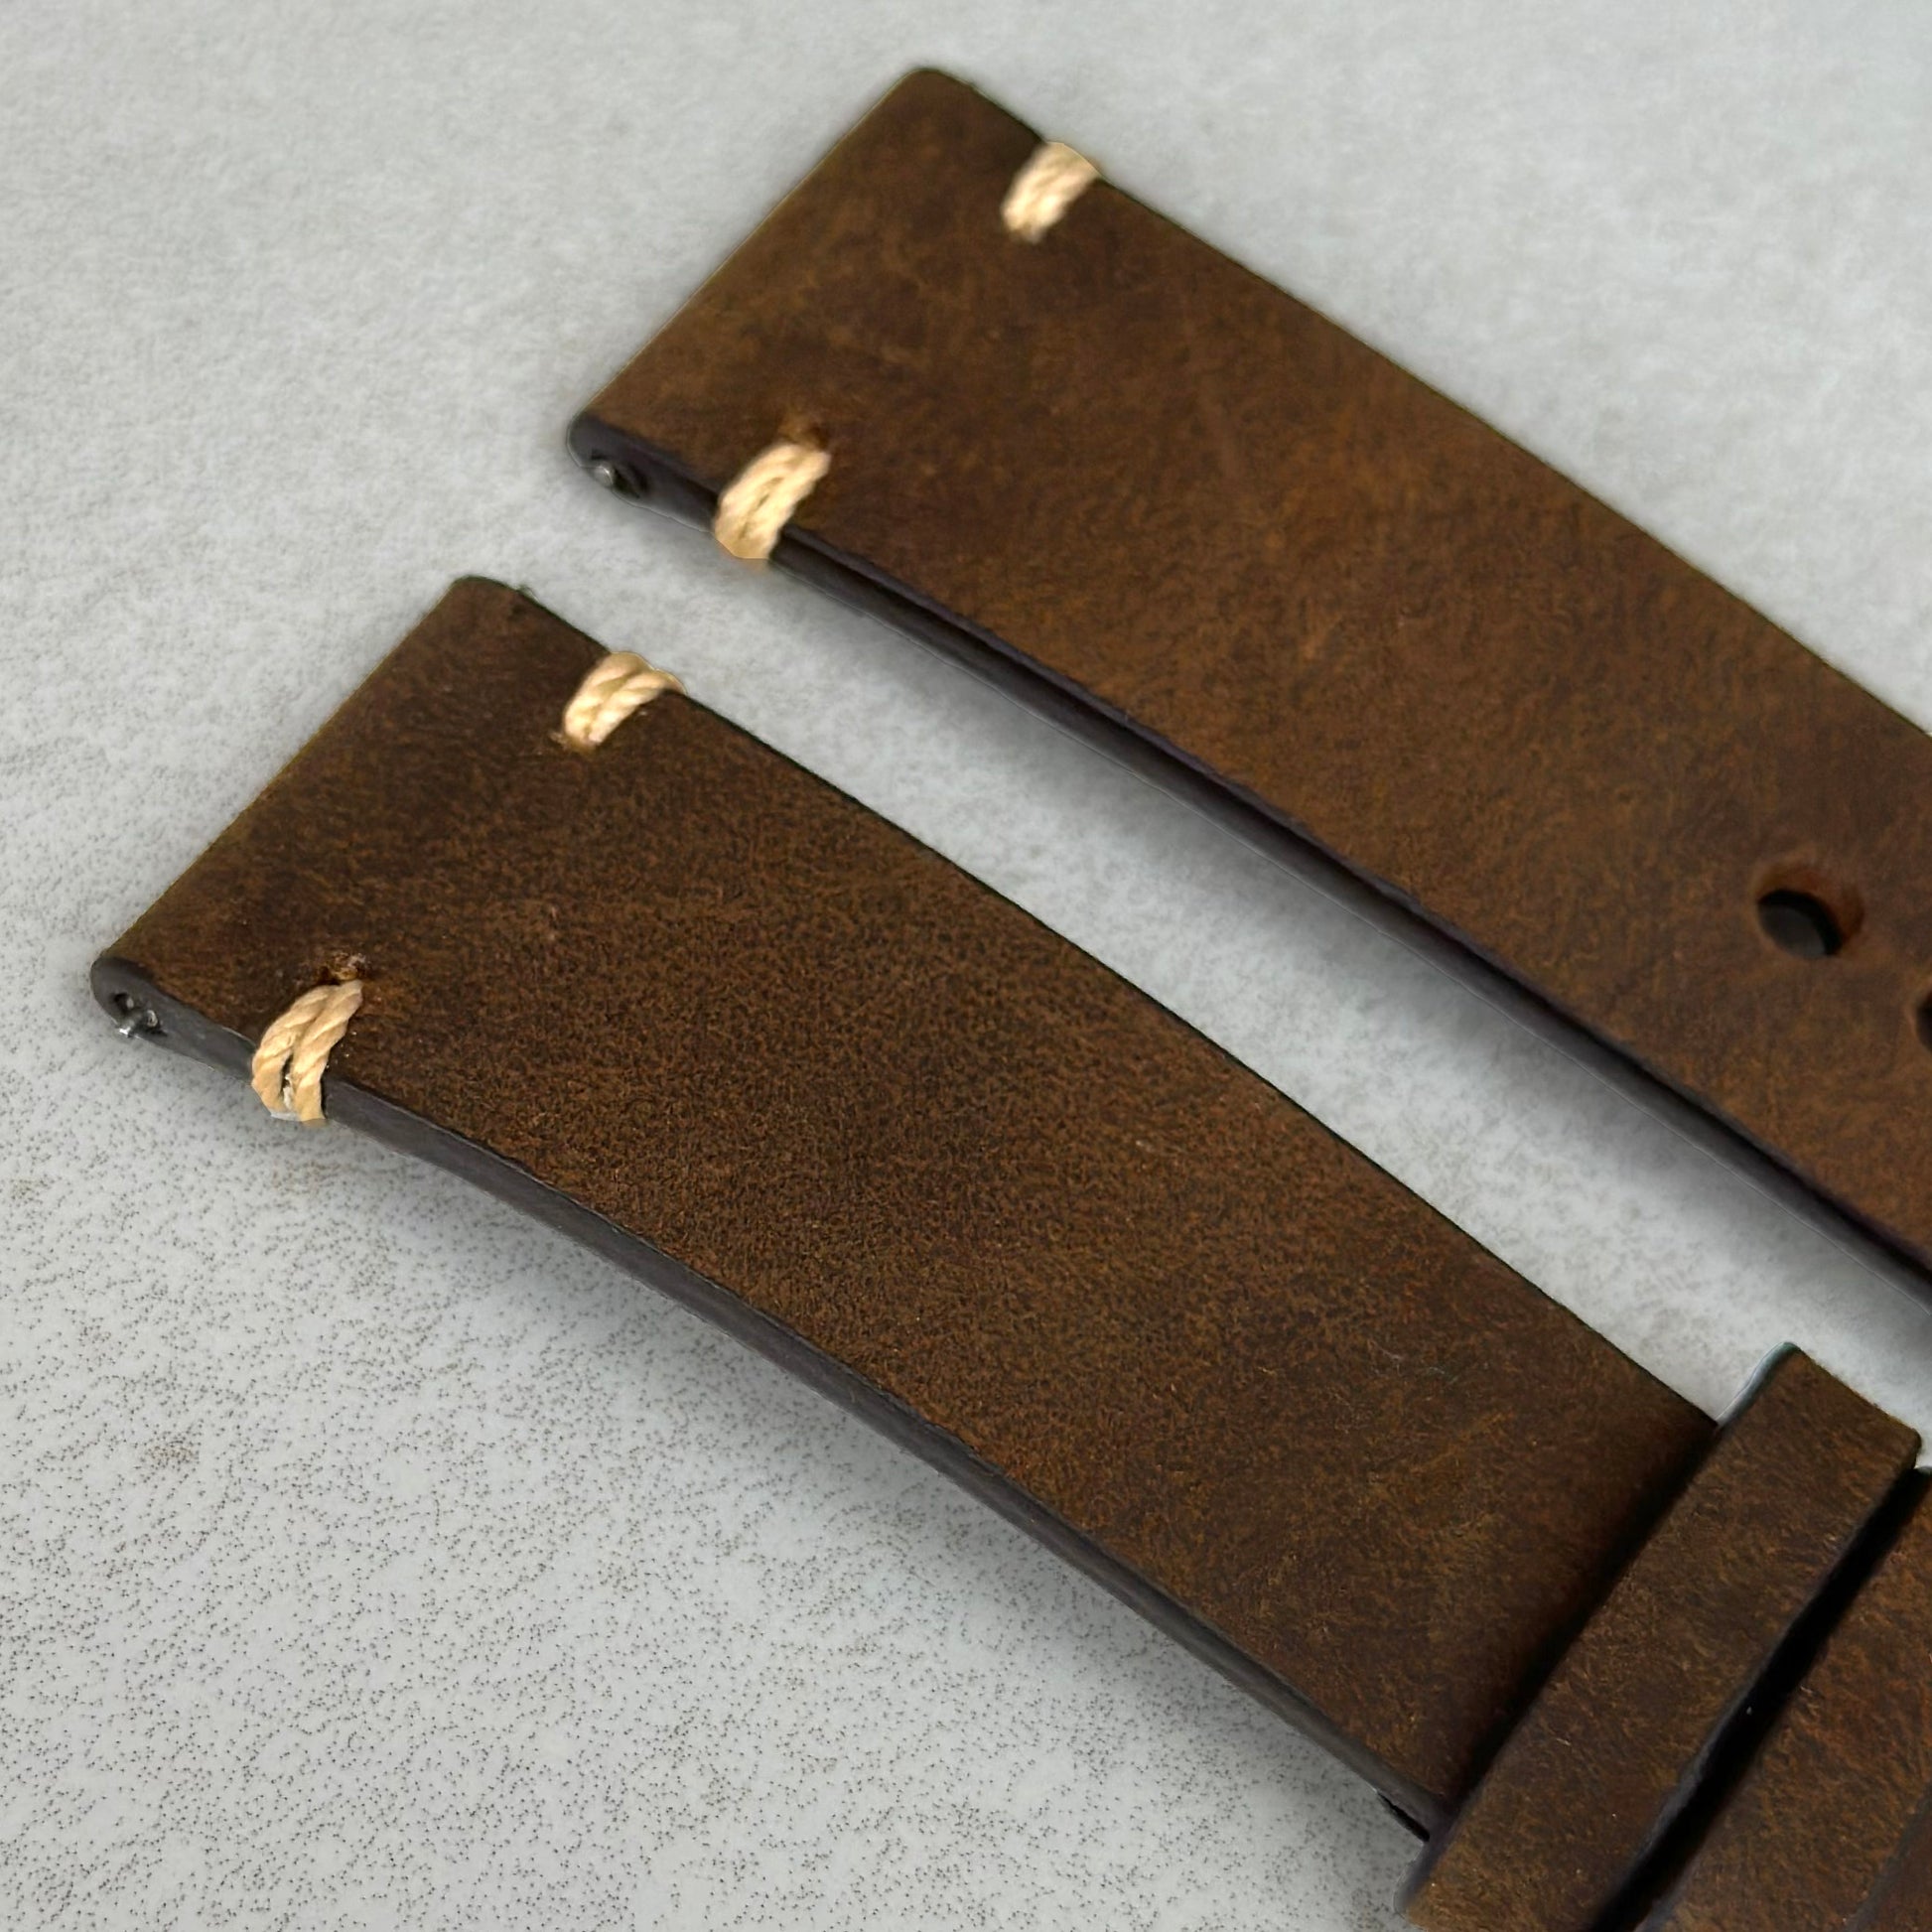 Top of the Madrid chocolate brown horse leather watch strap. Full grain leather. Contrast ivory stitching. Watch And Strap